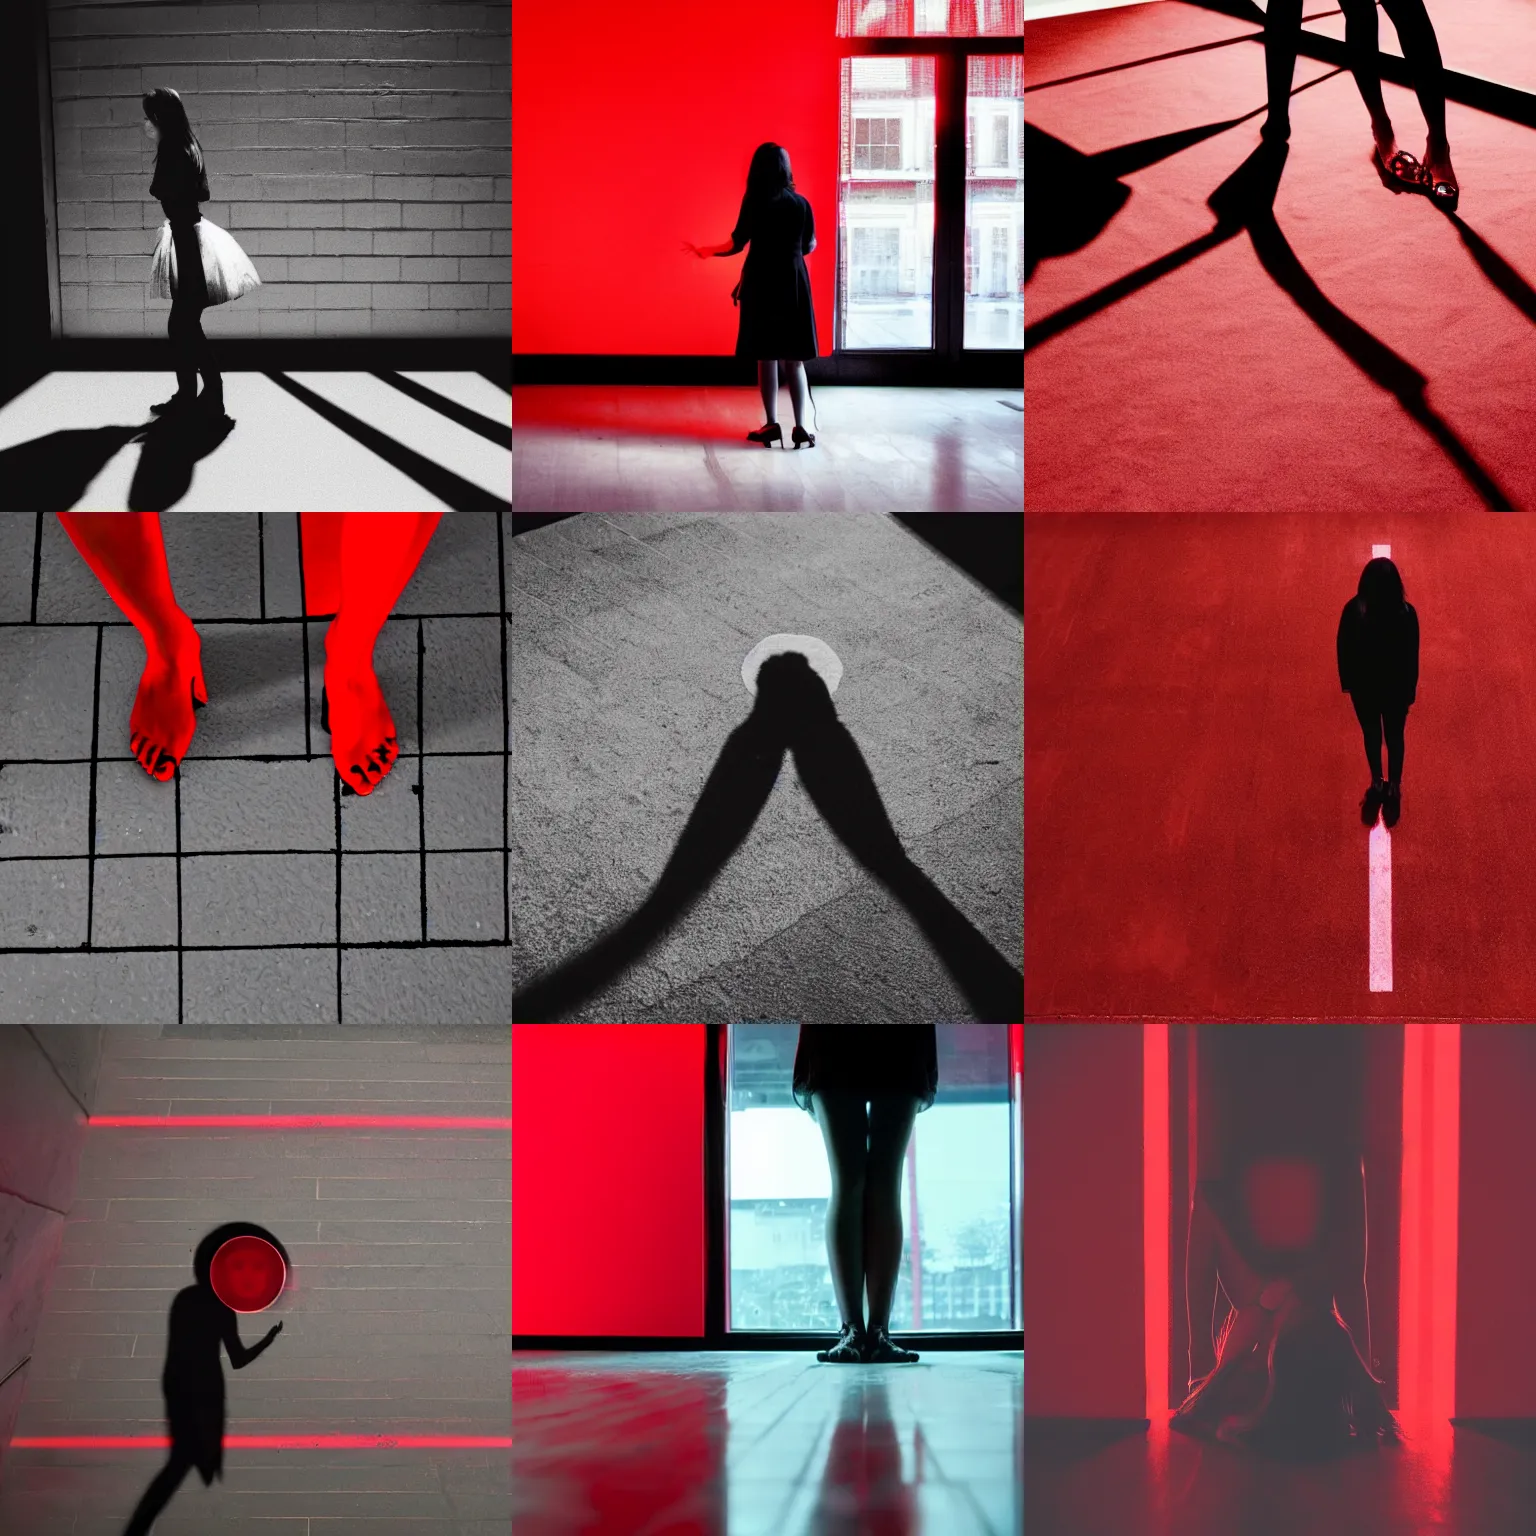 Prompt: she sees her own shadow cast in red light and outlined on the floor below her, she recognizes herself